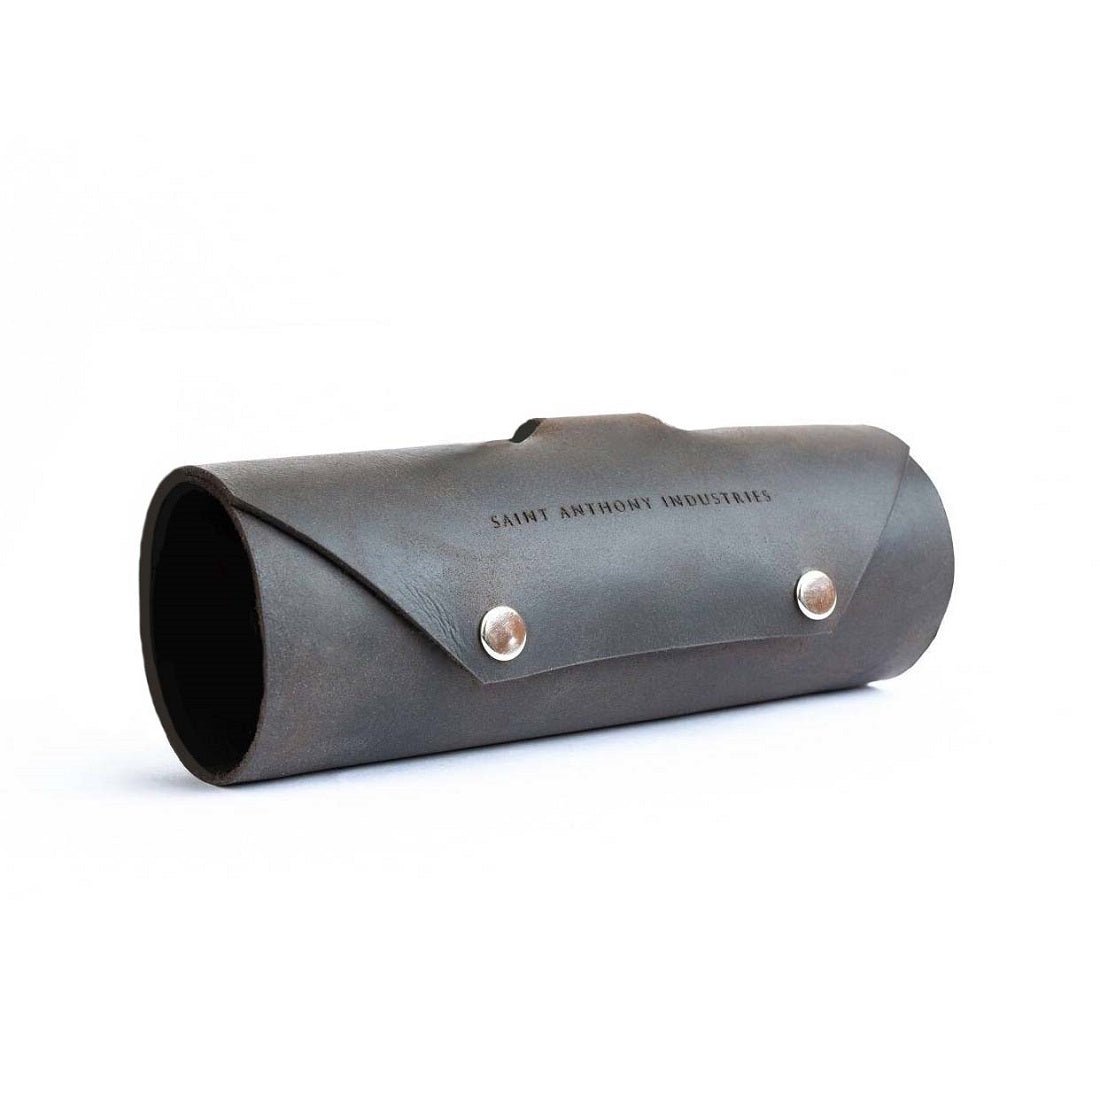 Millwright Hand Grinder - Replacement Leather Sleeve - Saint Anthony Industries